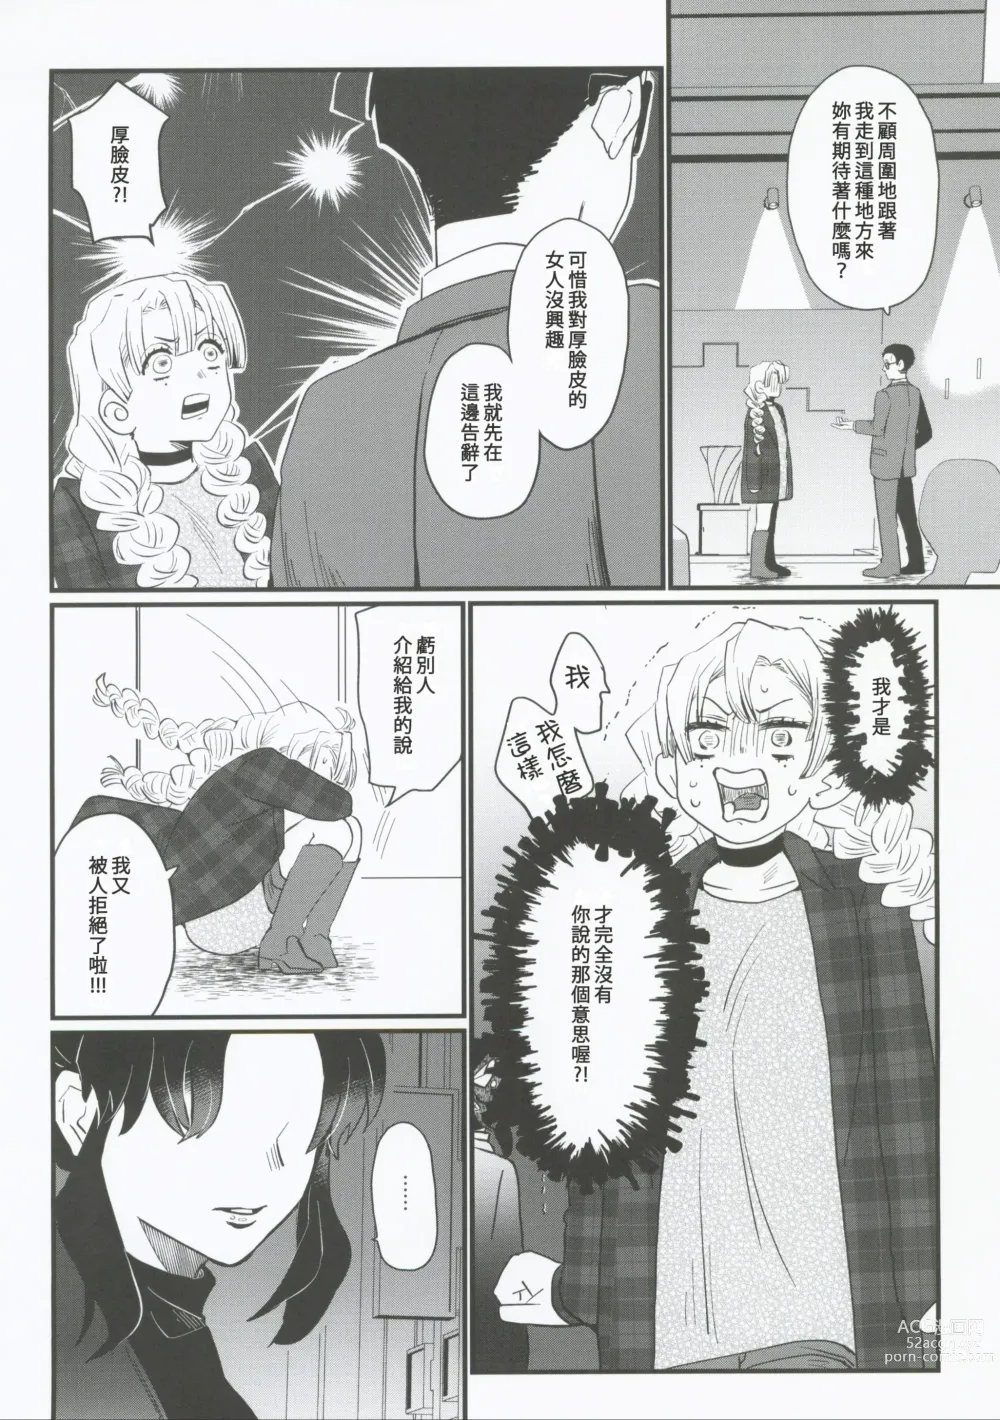 Page 6 of doujinshi 屬於妳的Omega